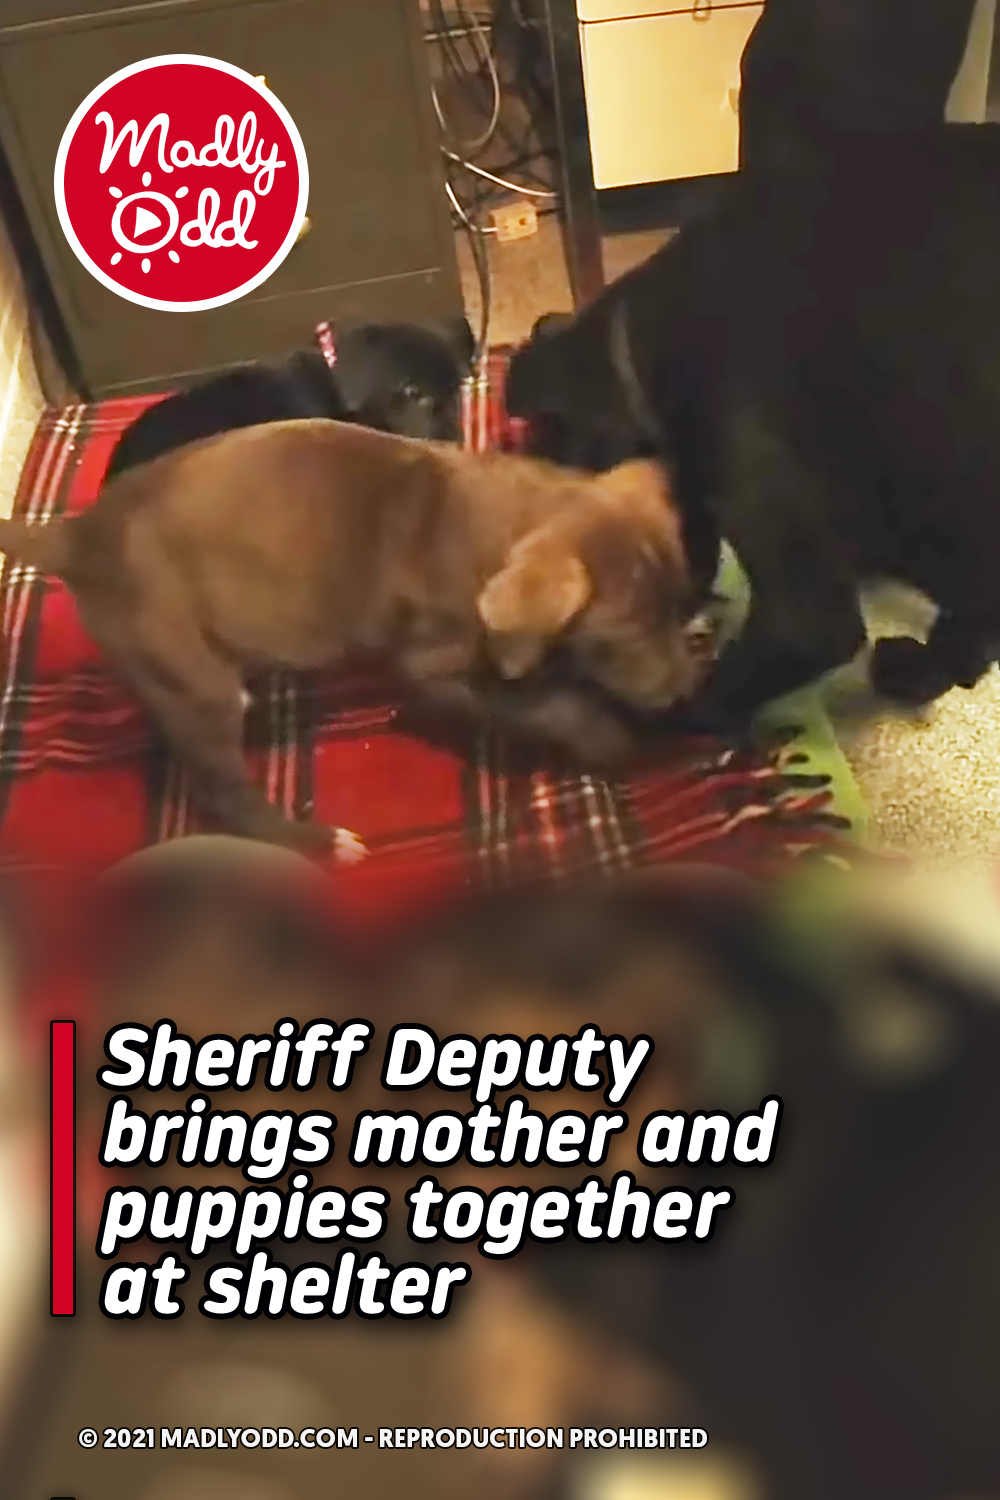 Sheriff Deputy brings mother and puppies together at shelter